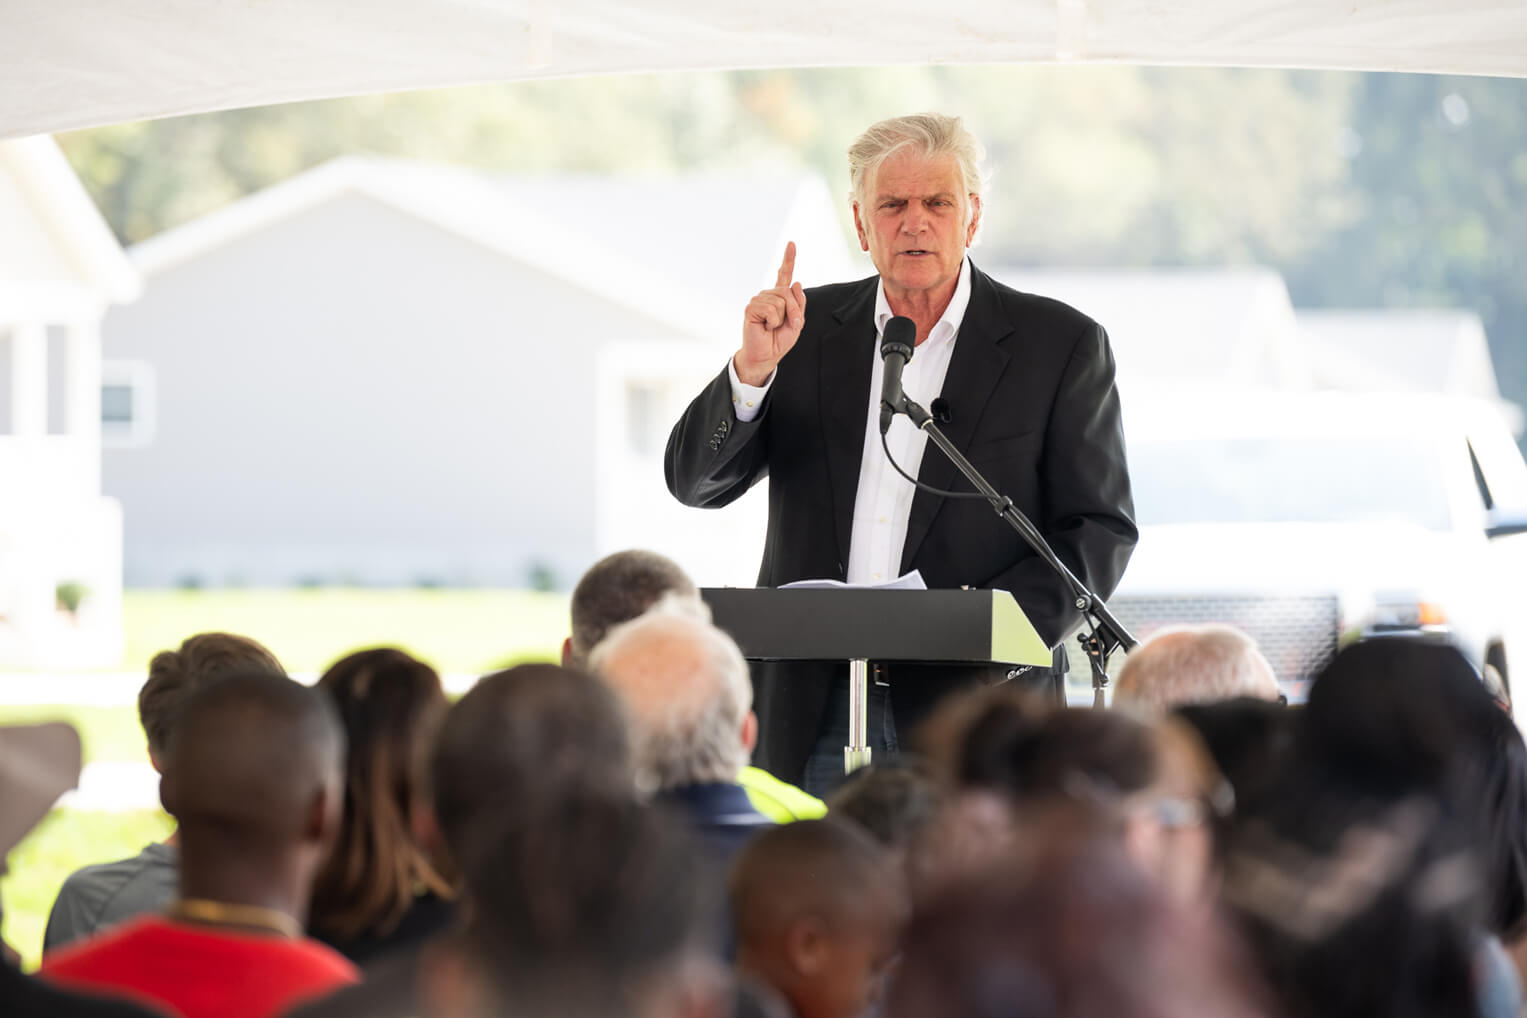 Franklin Graham led a prayerful dedication for the first 16 homes in the New Hope Acres community.